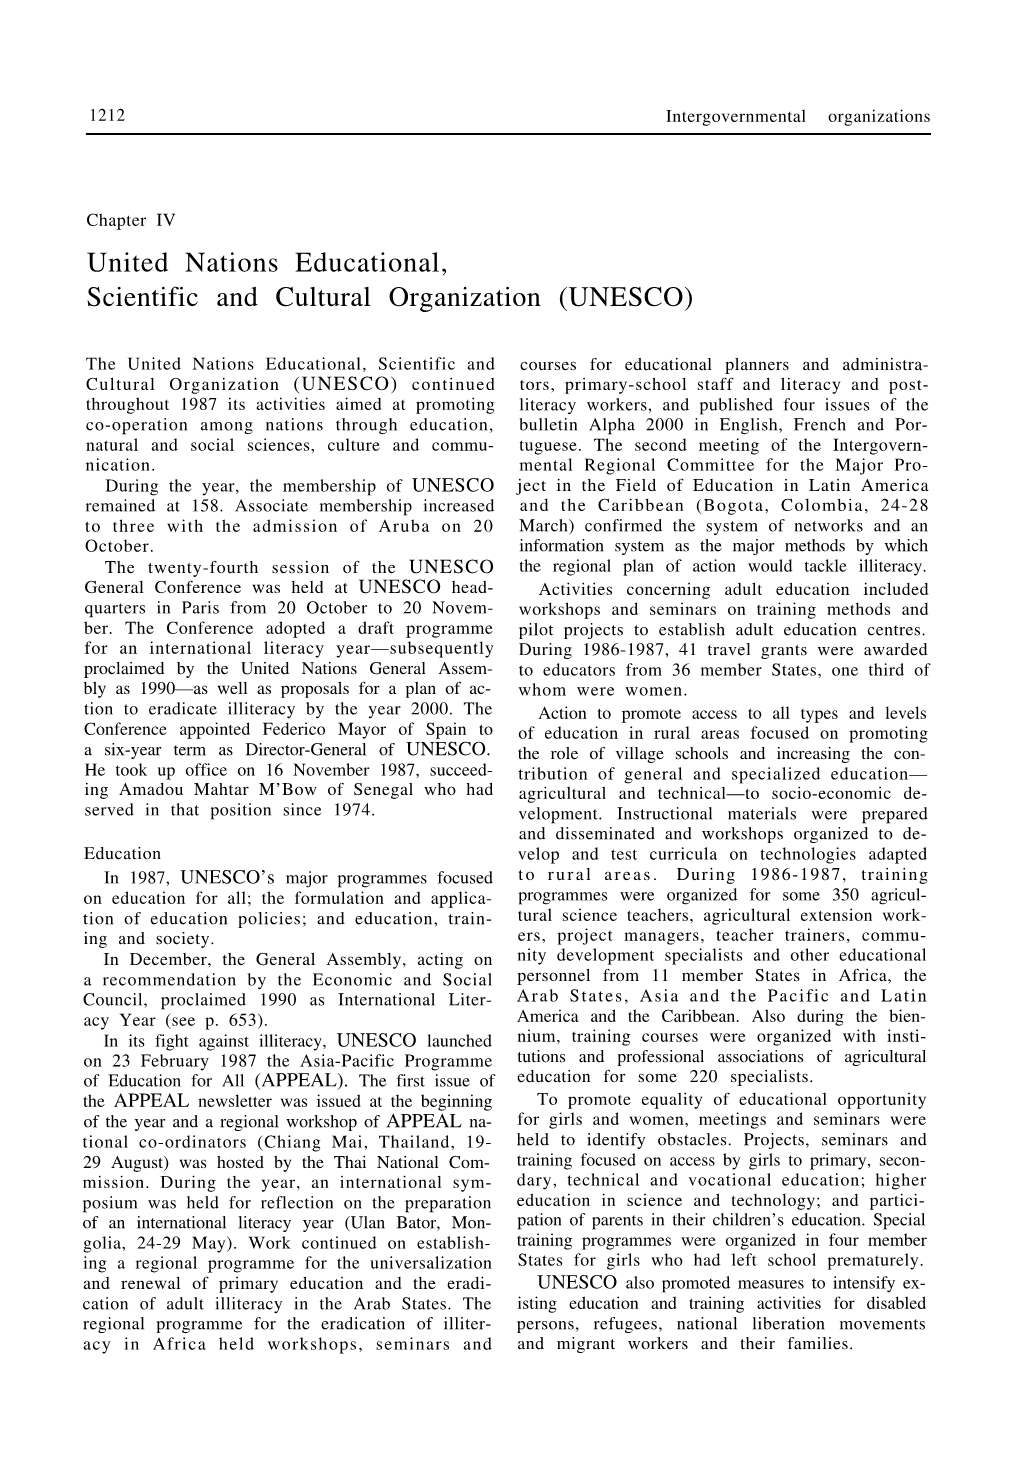 [ 1987 ] Part 2 Chapter 4 the United Nations Educational, Scientific And